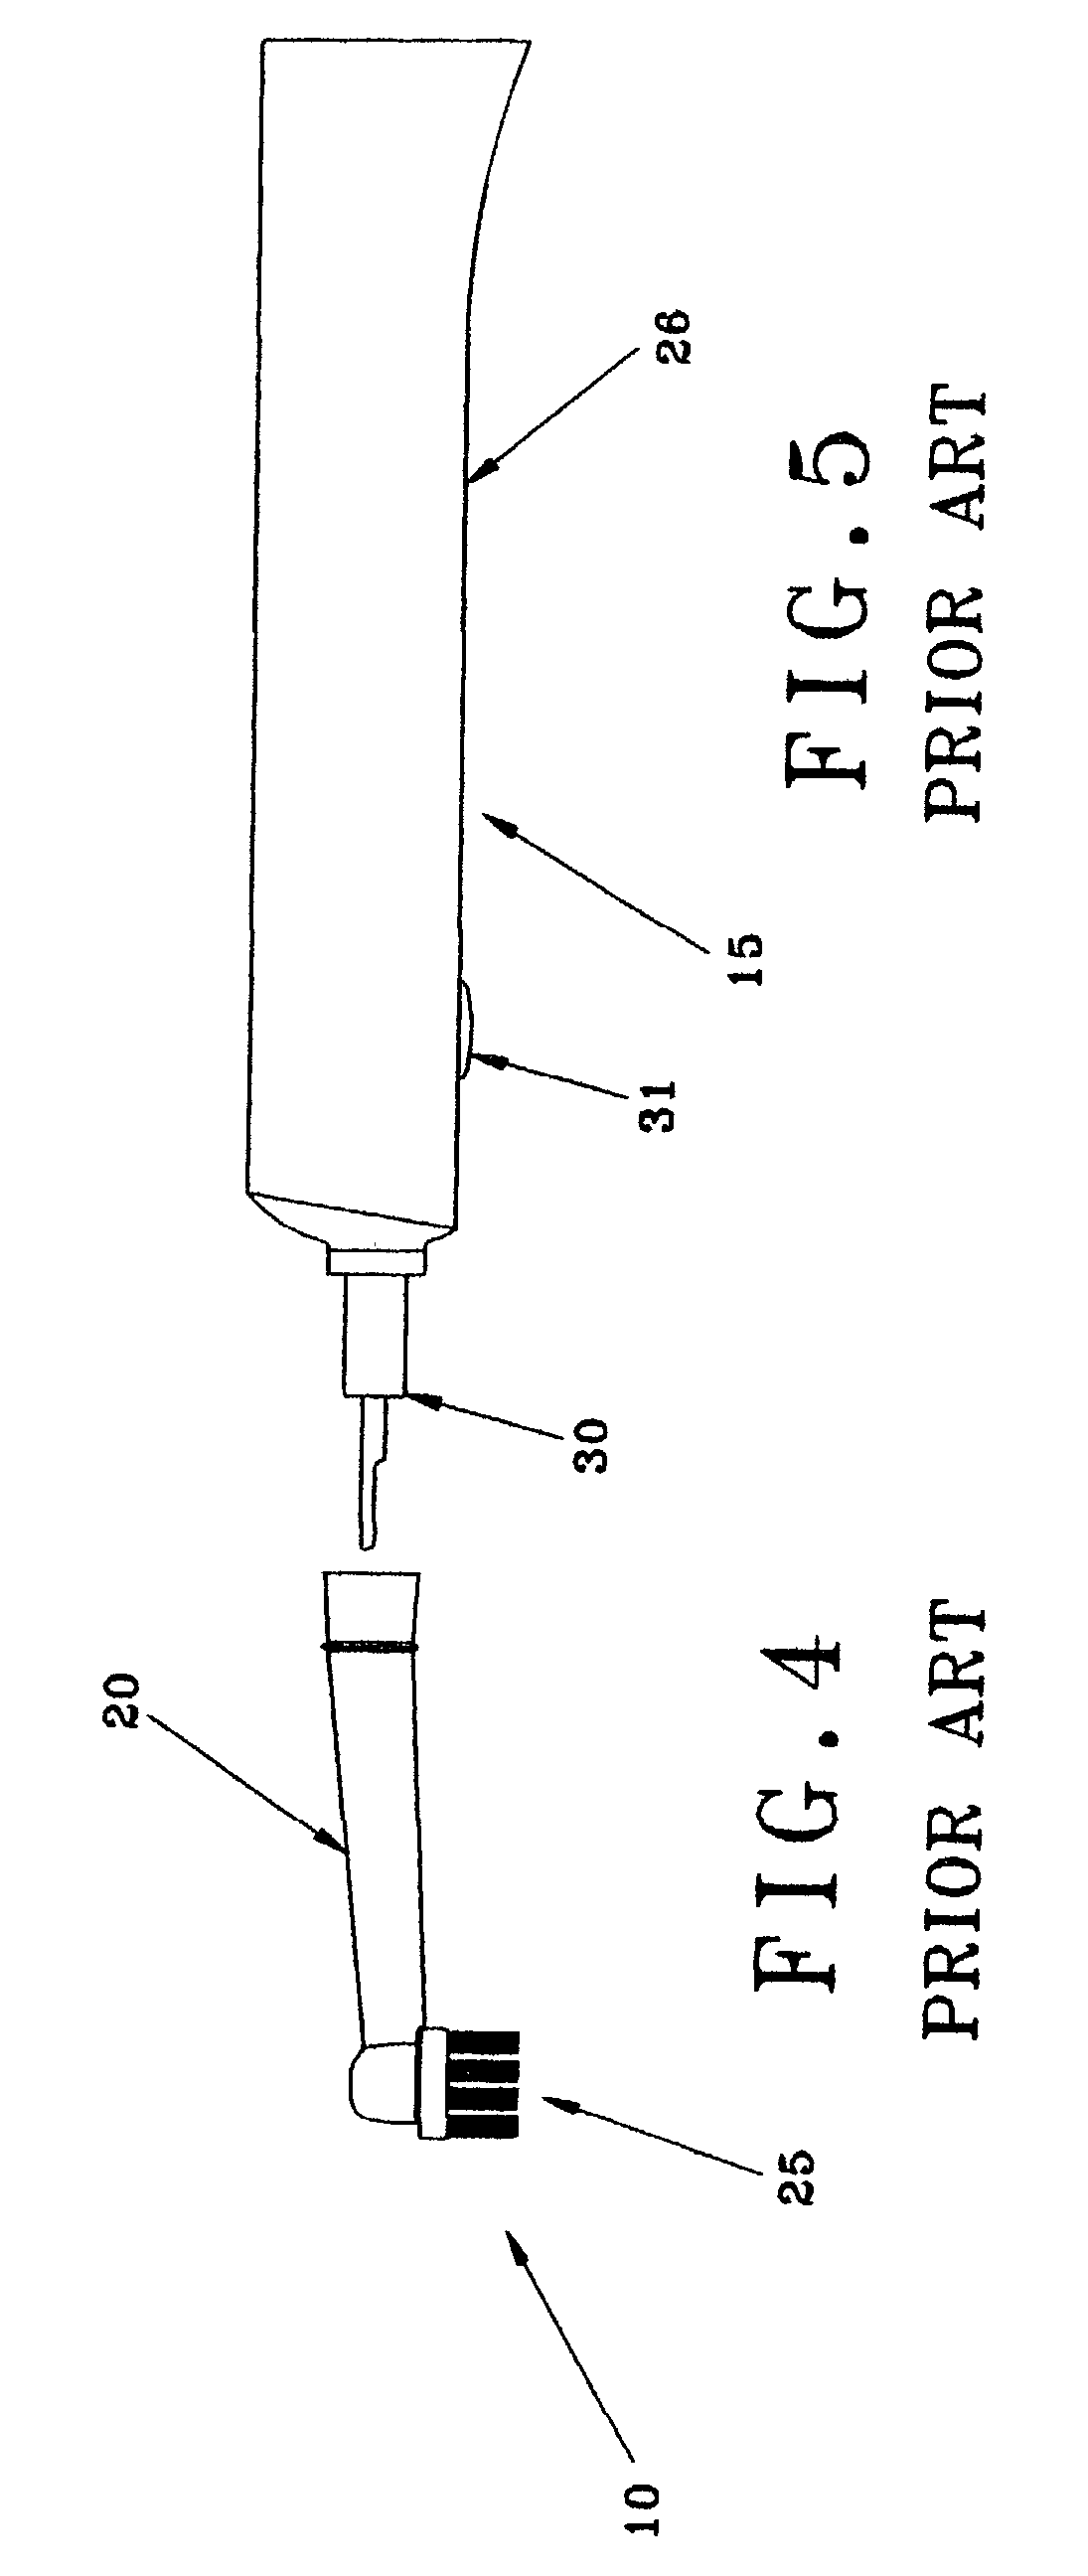 Powered toothbrush with associated oral solution dispenser mechanism